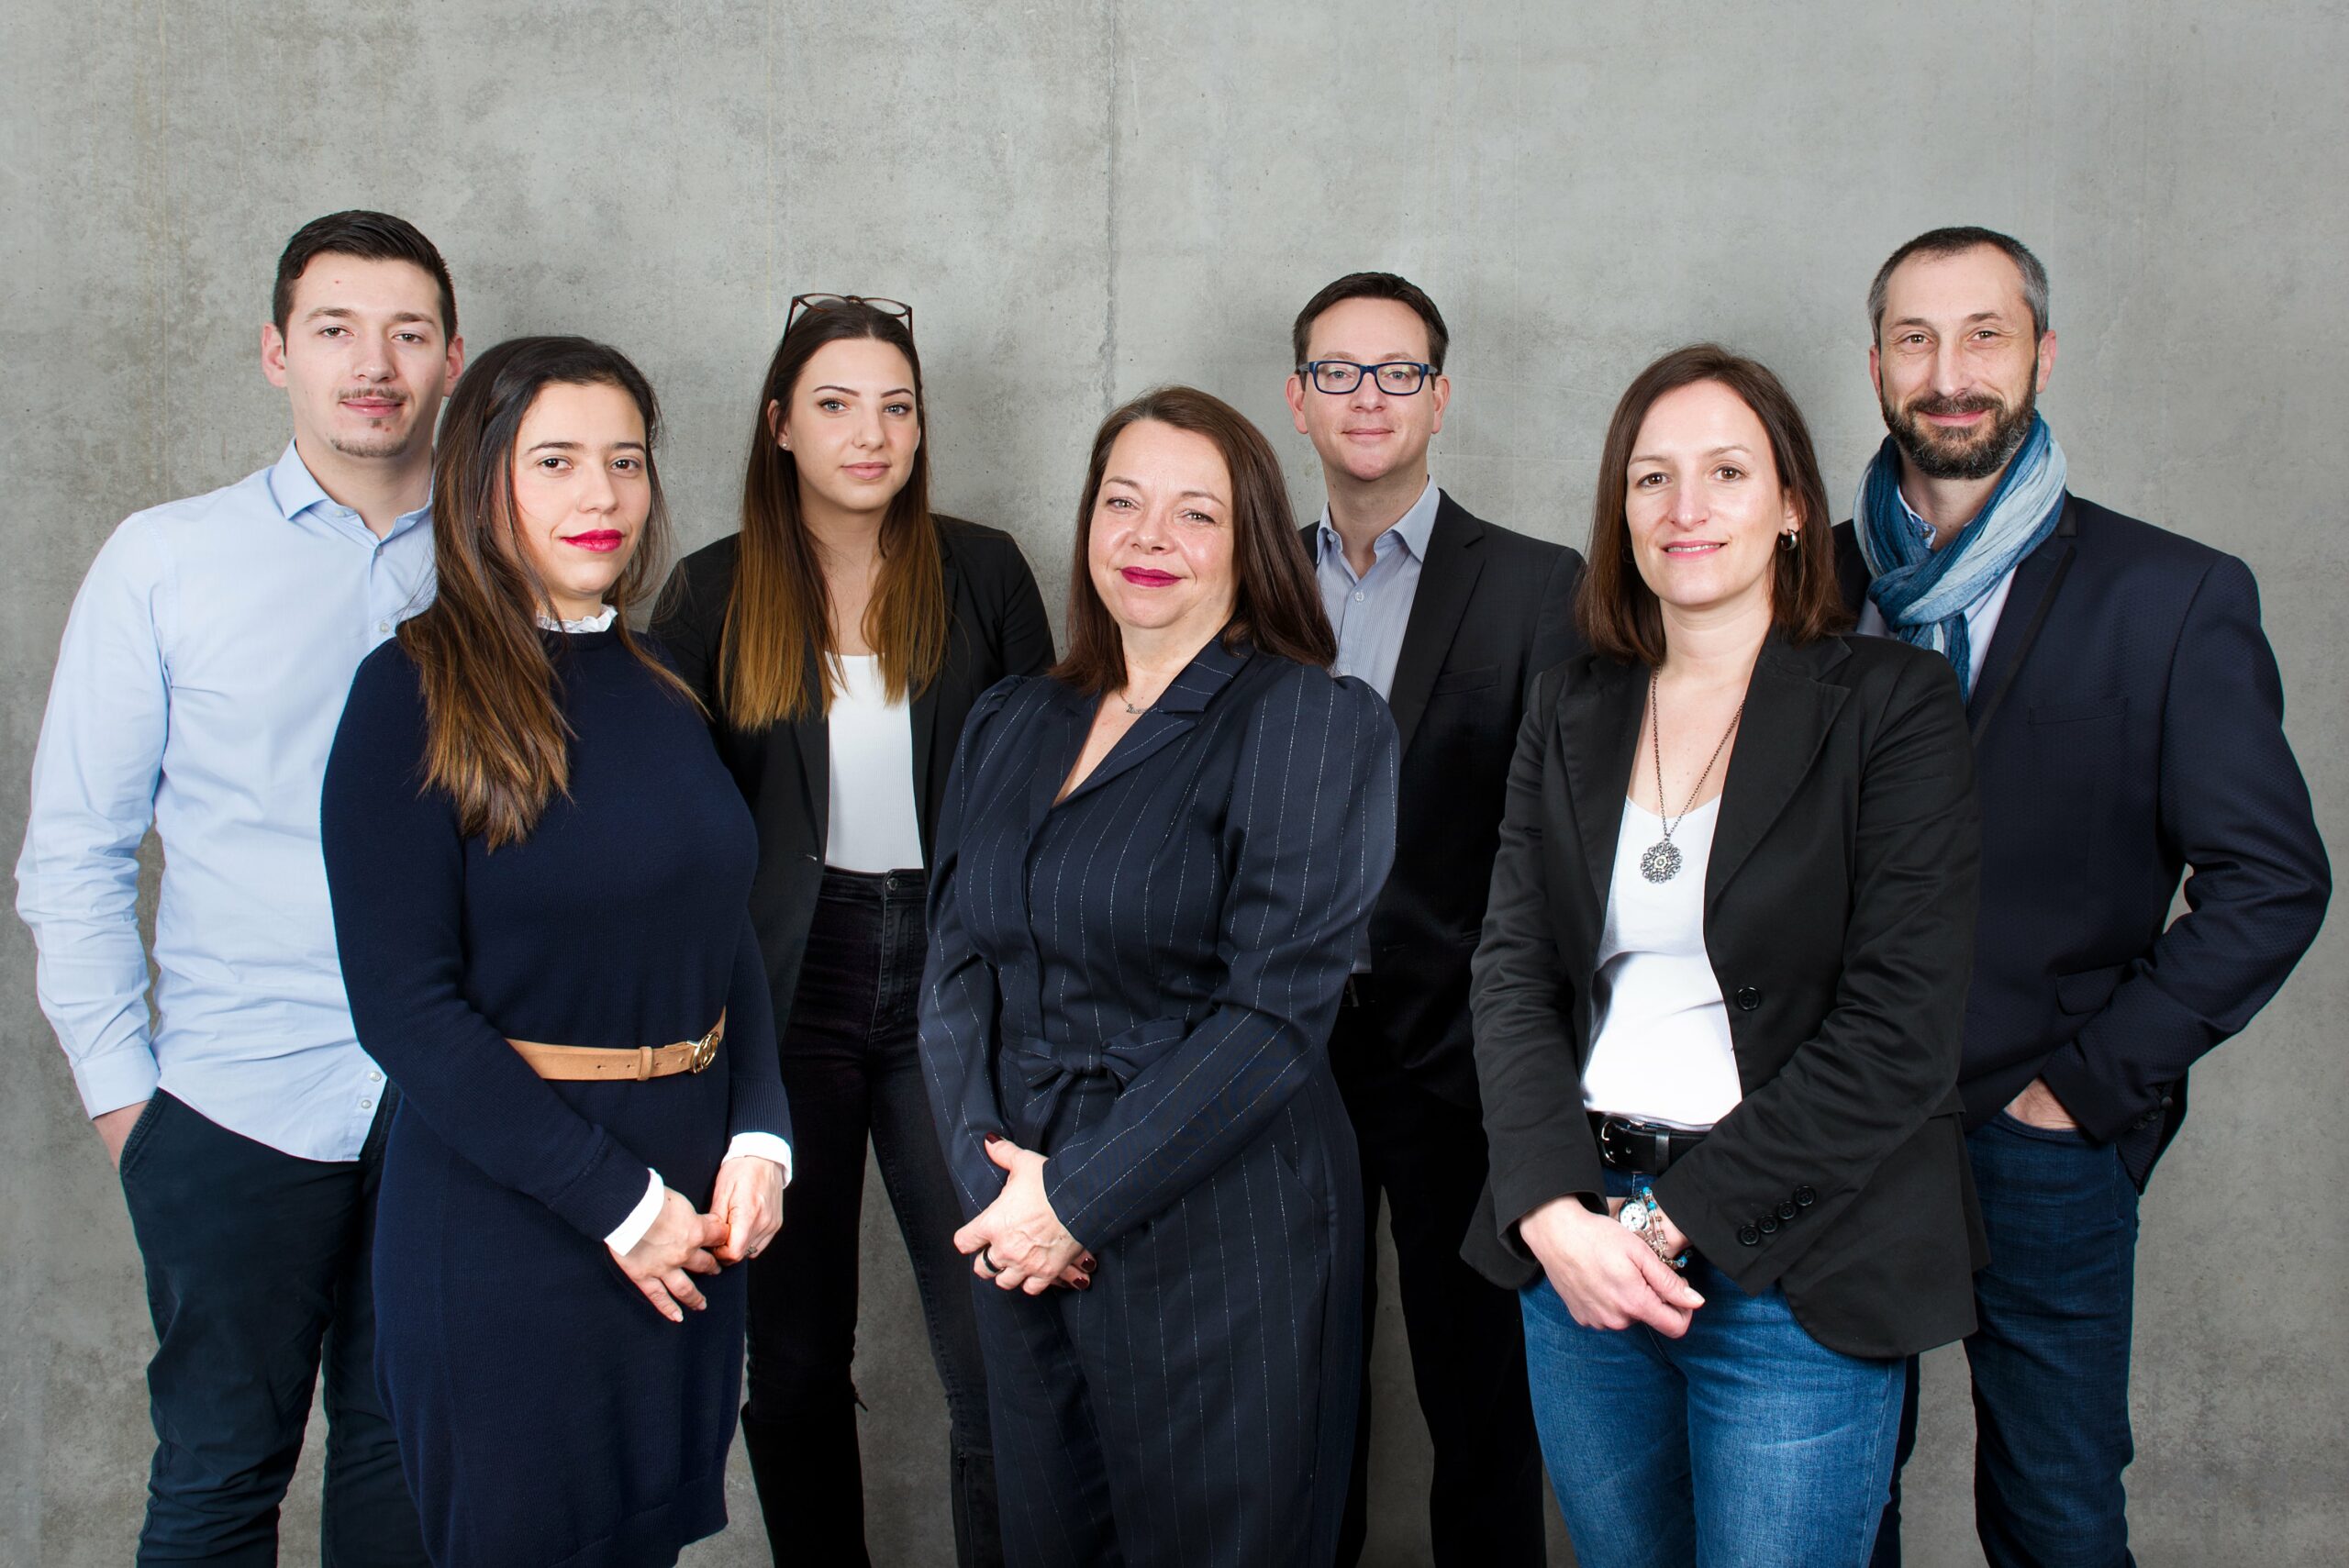 equipe genimmo luxembourg - gestion locative et syndic